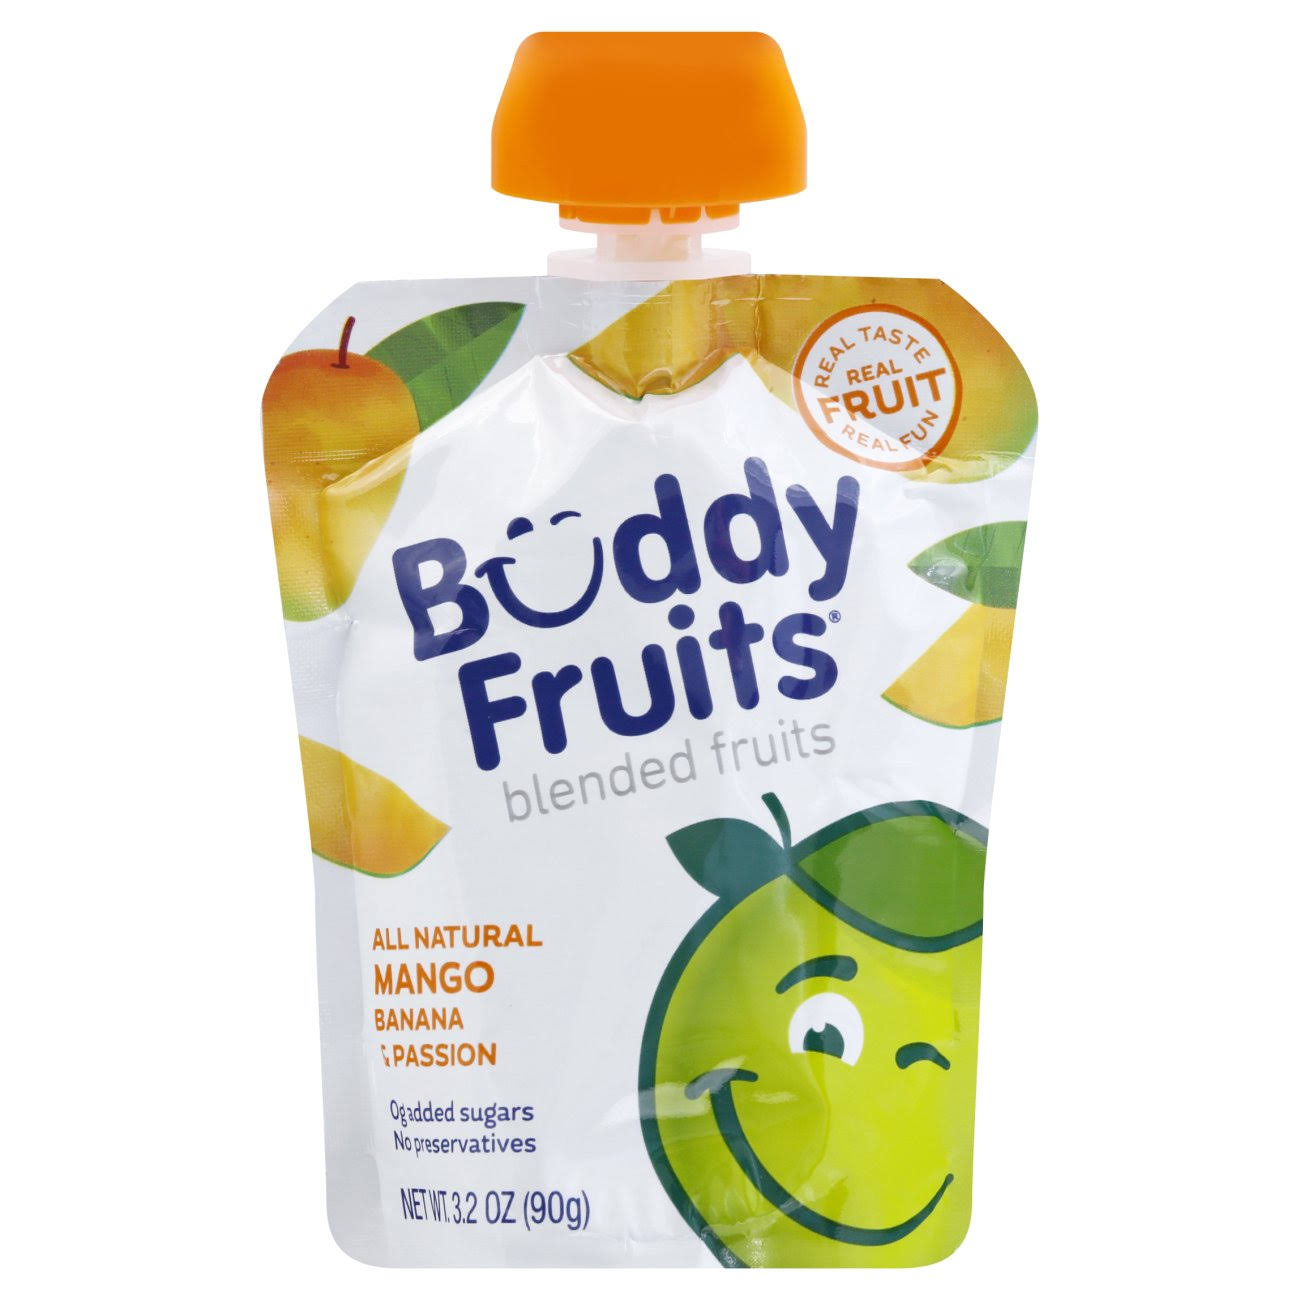 Buddy Fruits Pure Blended Fruit, Mango Passion & Banana - 3.2 oz pouch